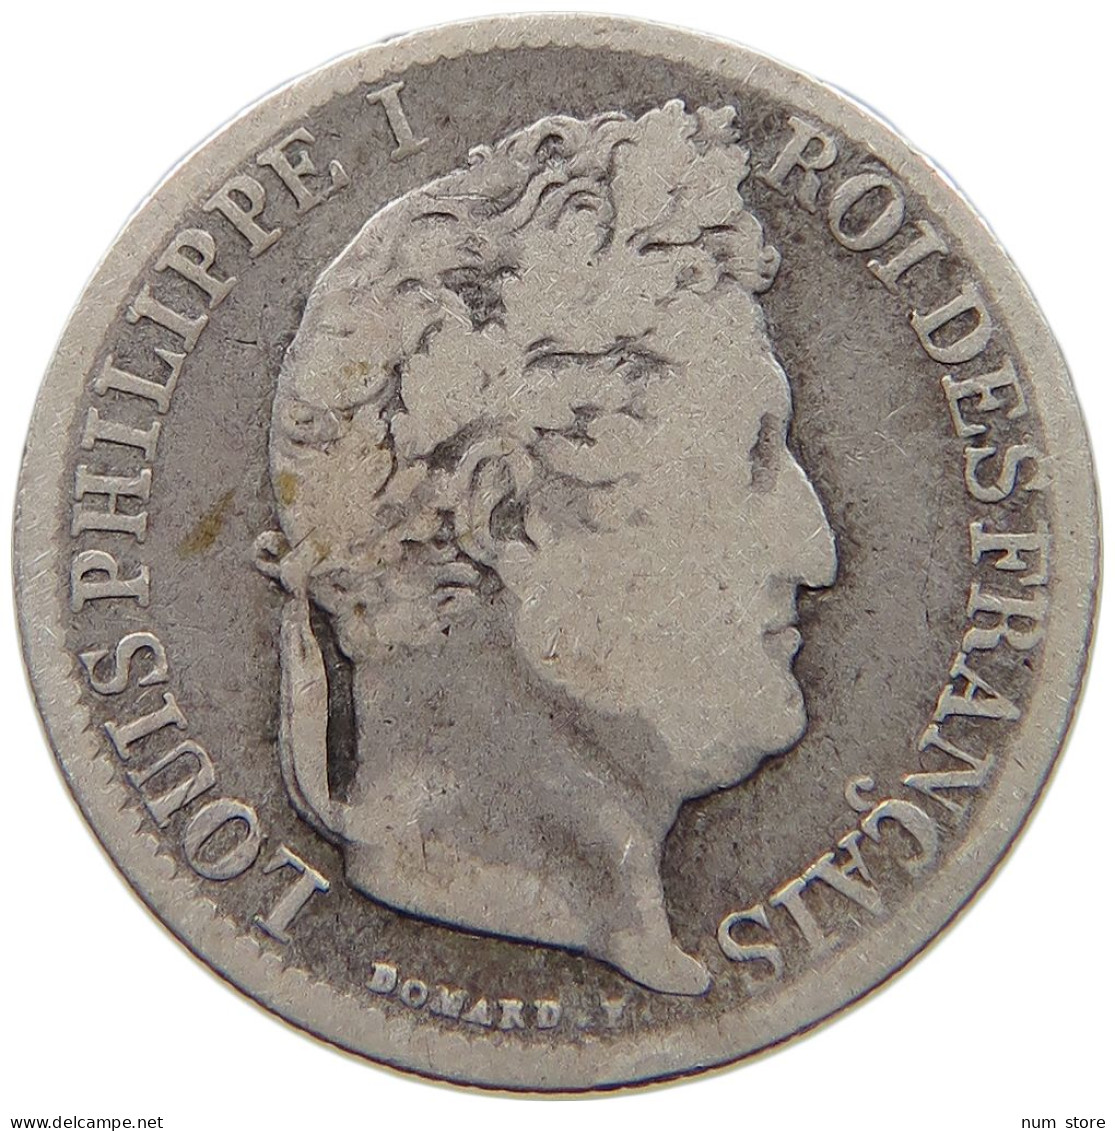 FRANCE 50 CENTIMES 1846 A LOUIS PHILIPPE I. (1830-1848) #a082 0575 - 50 Centimes